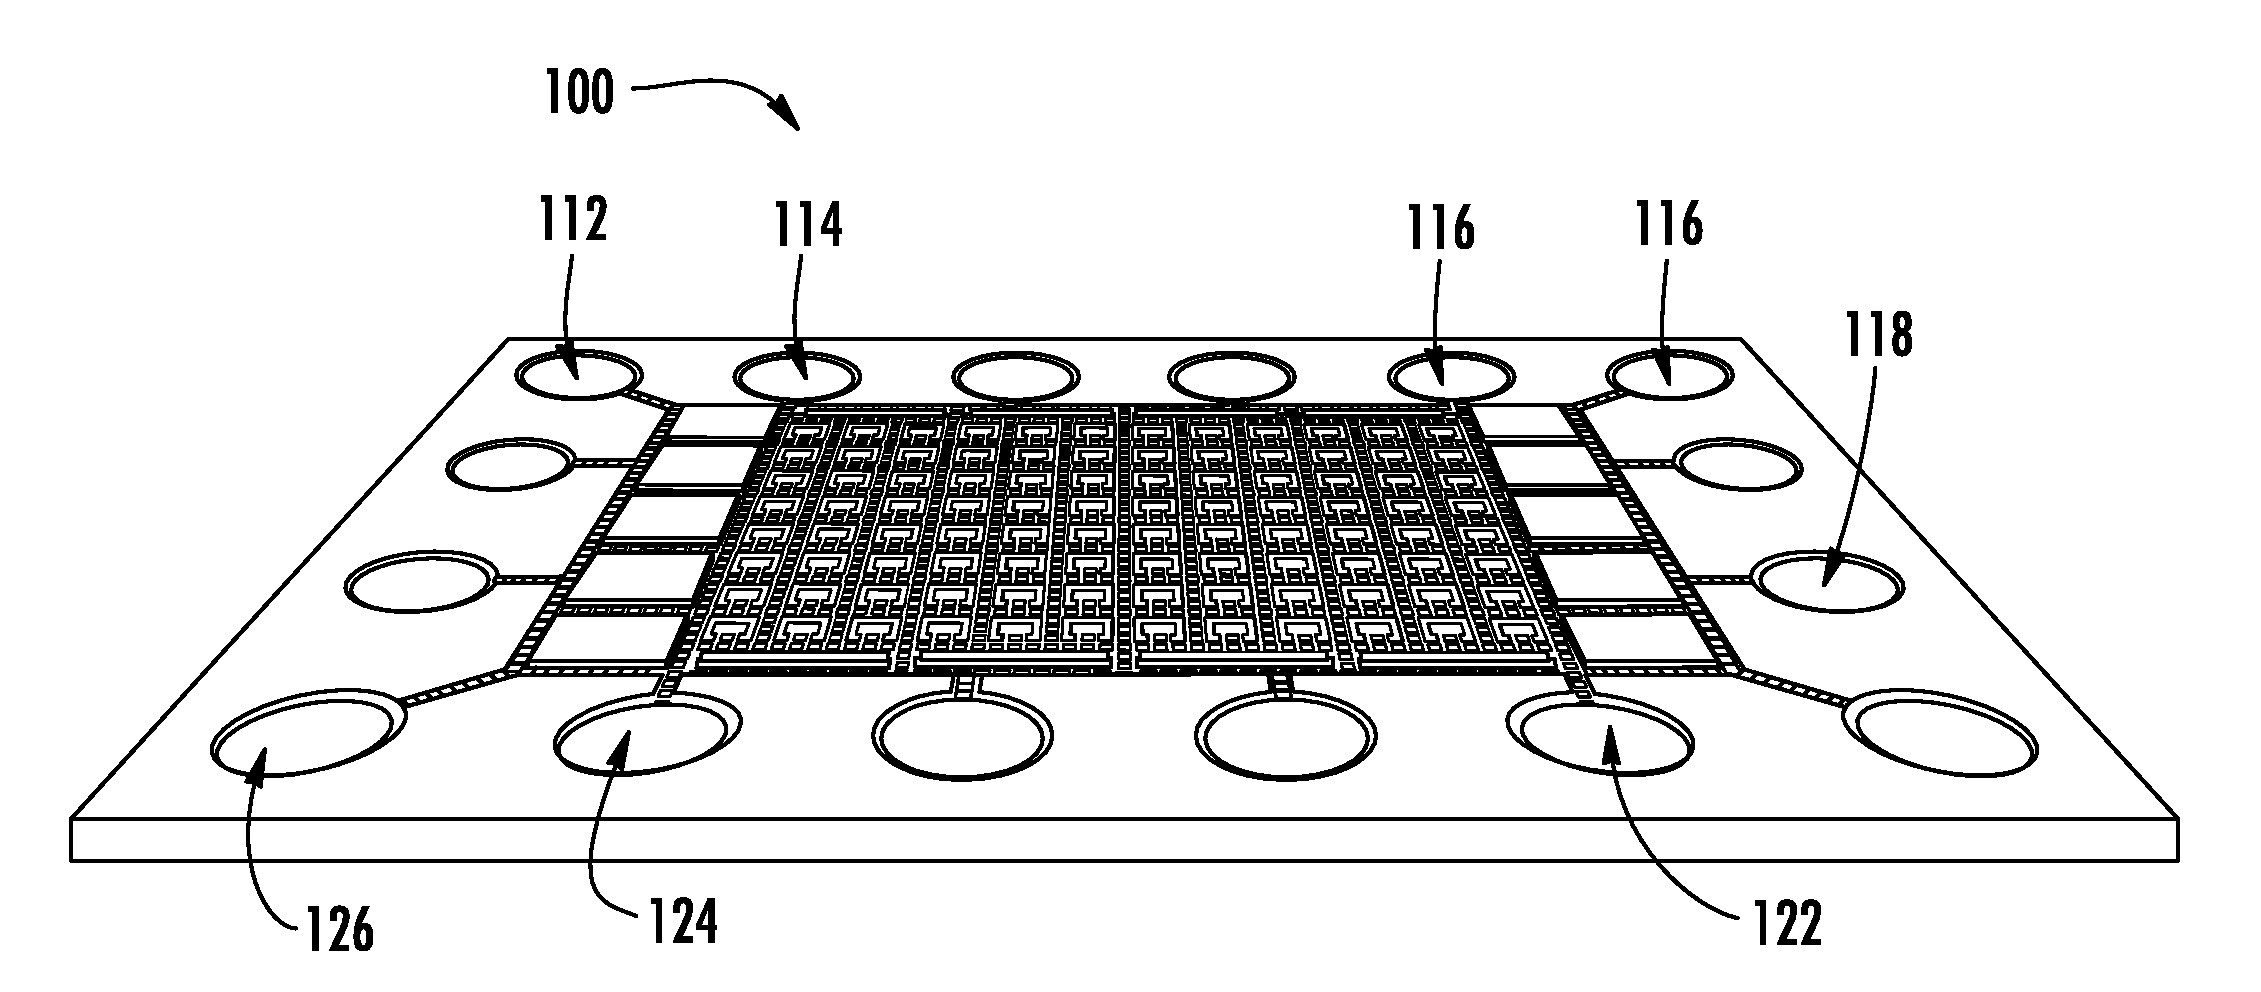 Protein Crystallization Screening and Optimization Droplet Actuators, Systems and Methods